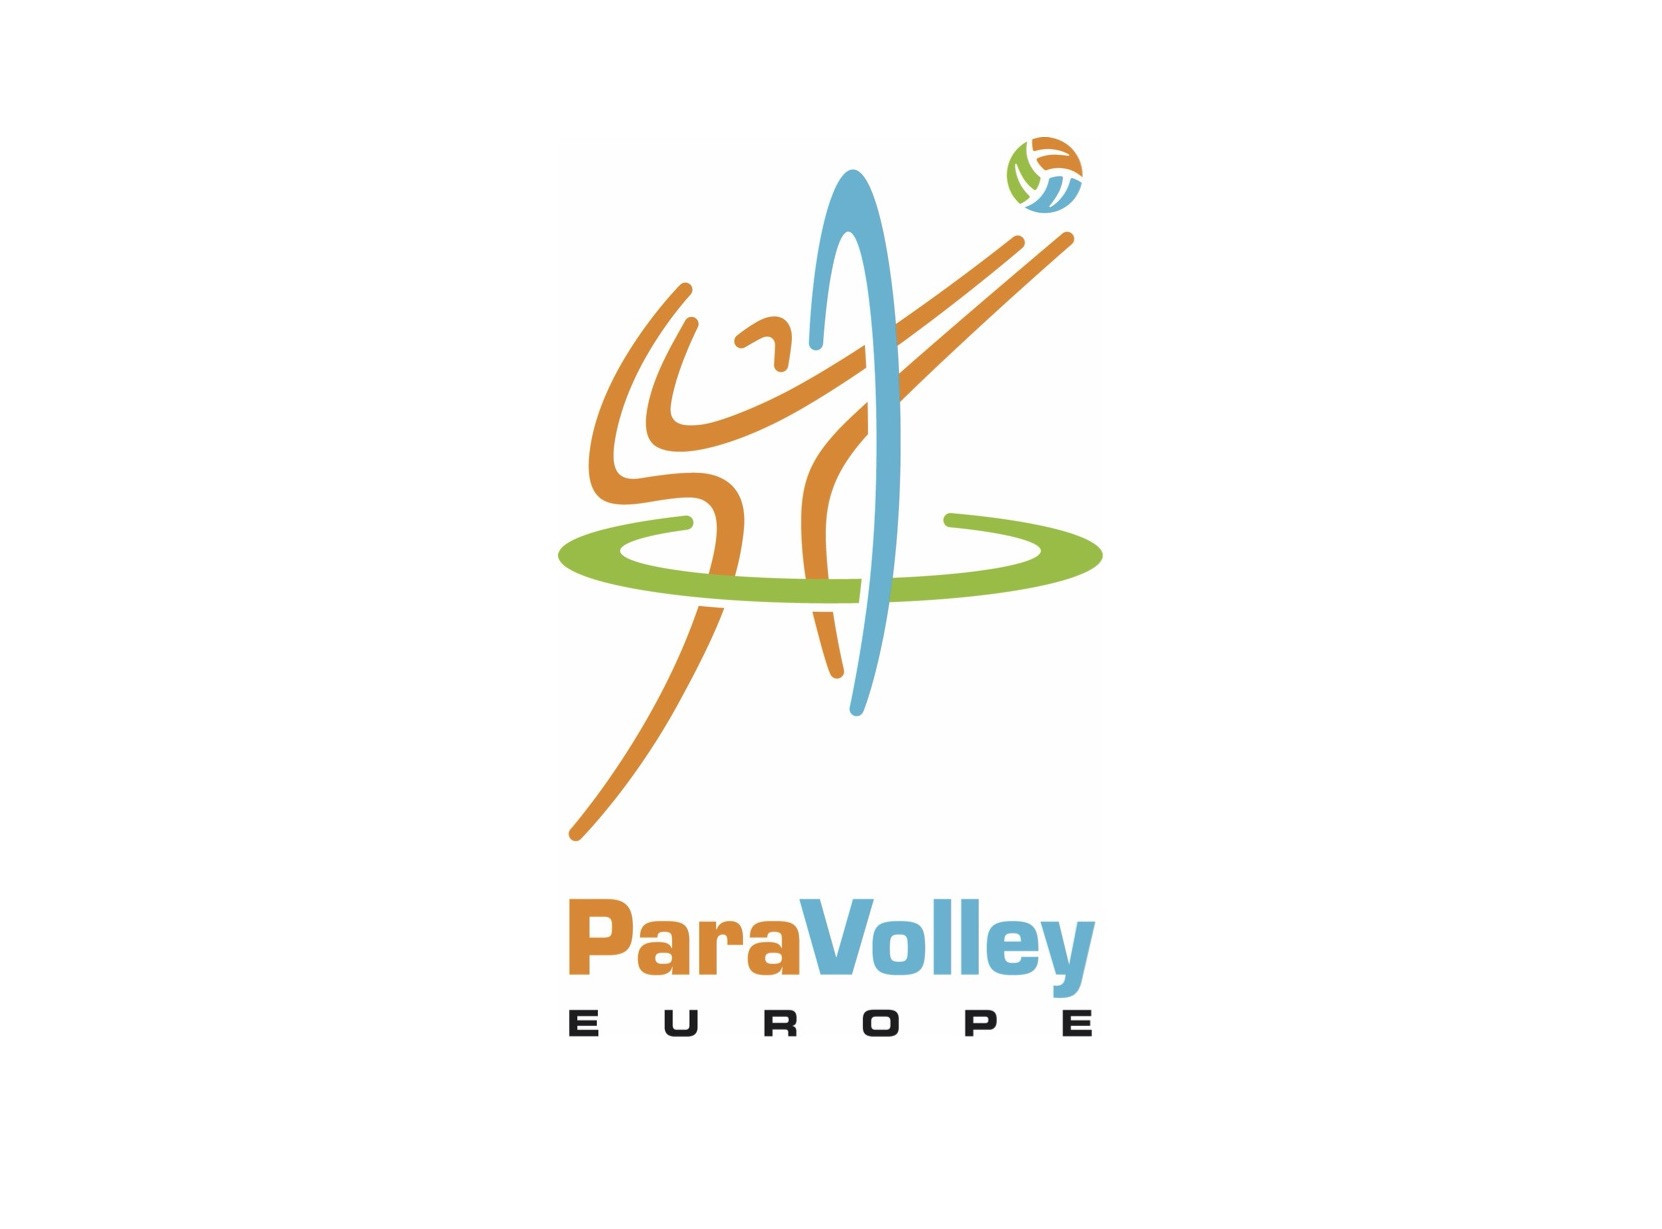 ParaVolley Europe has hired its first employee ©ParaVolley Europe